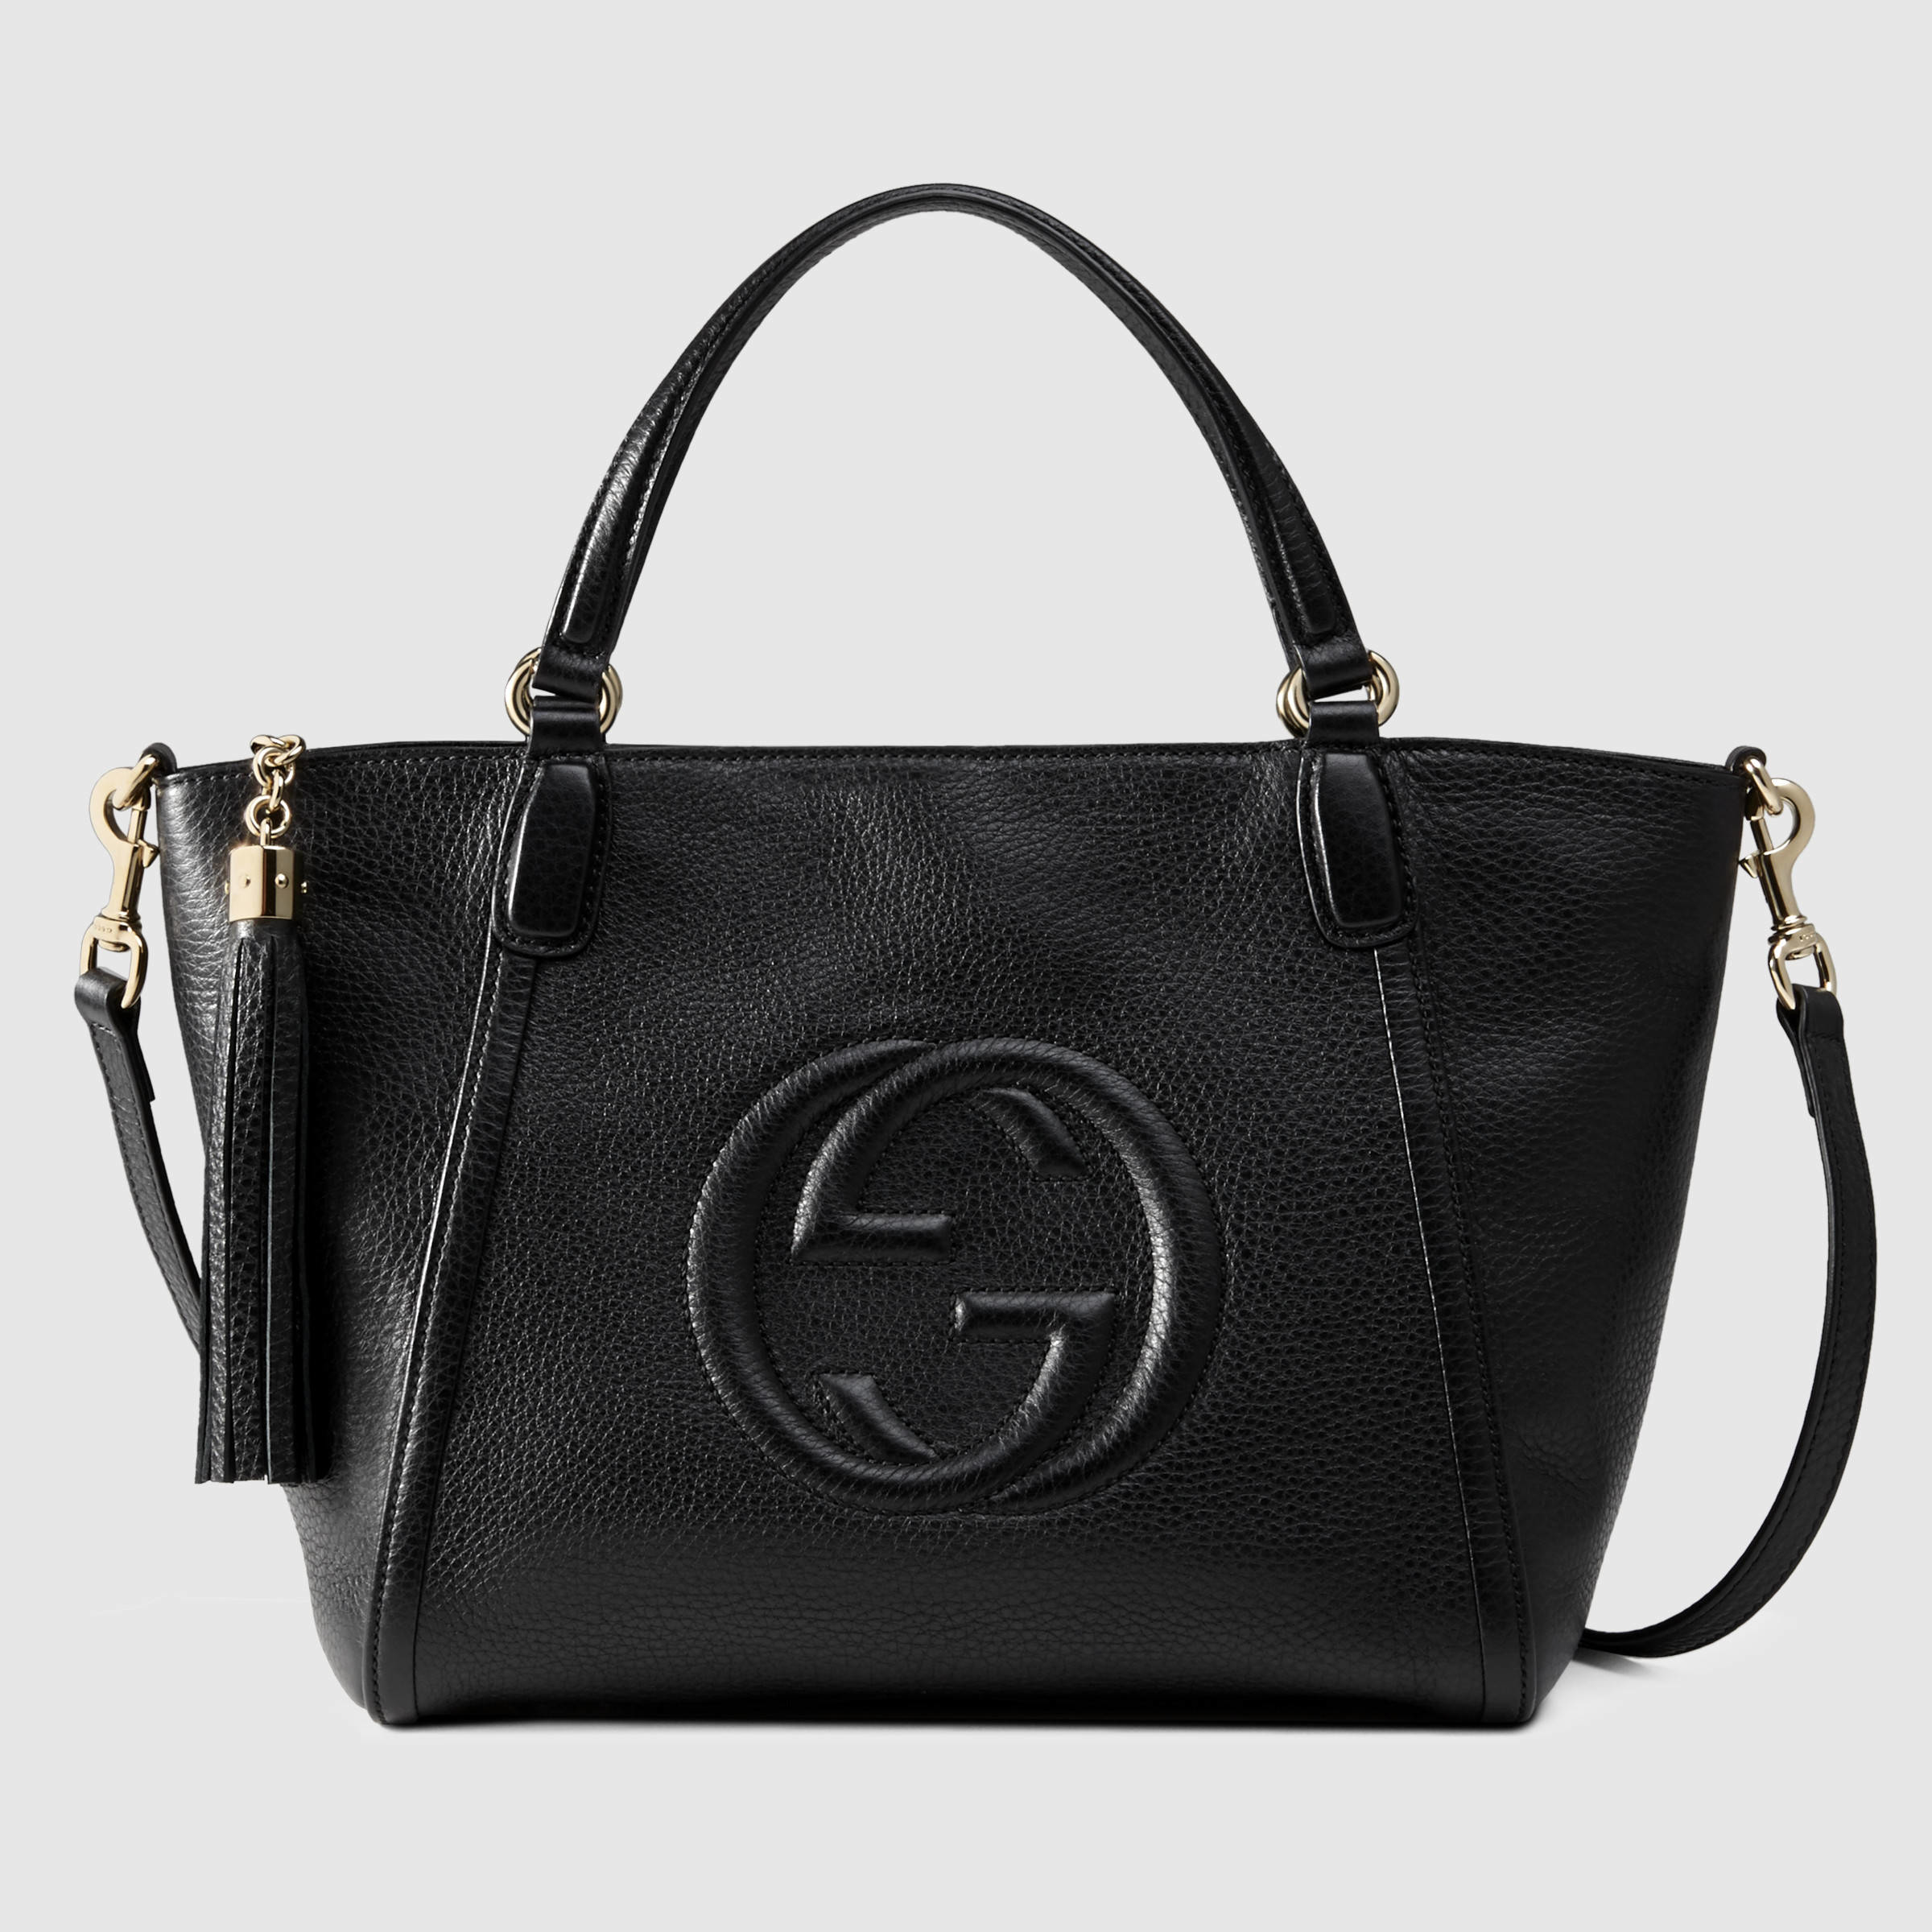 Gucci Soho Leather Top Handle Bag in 